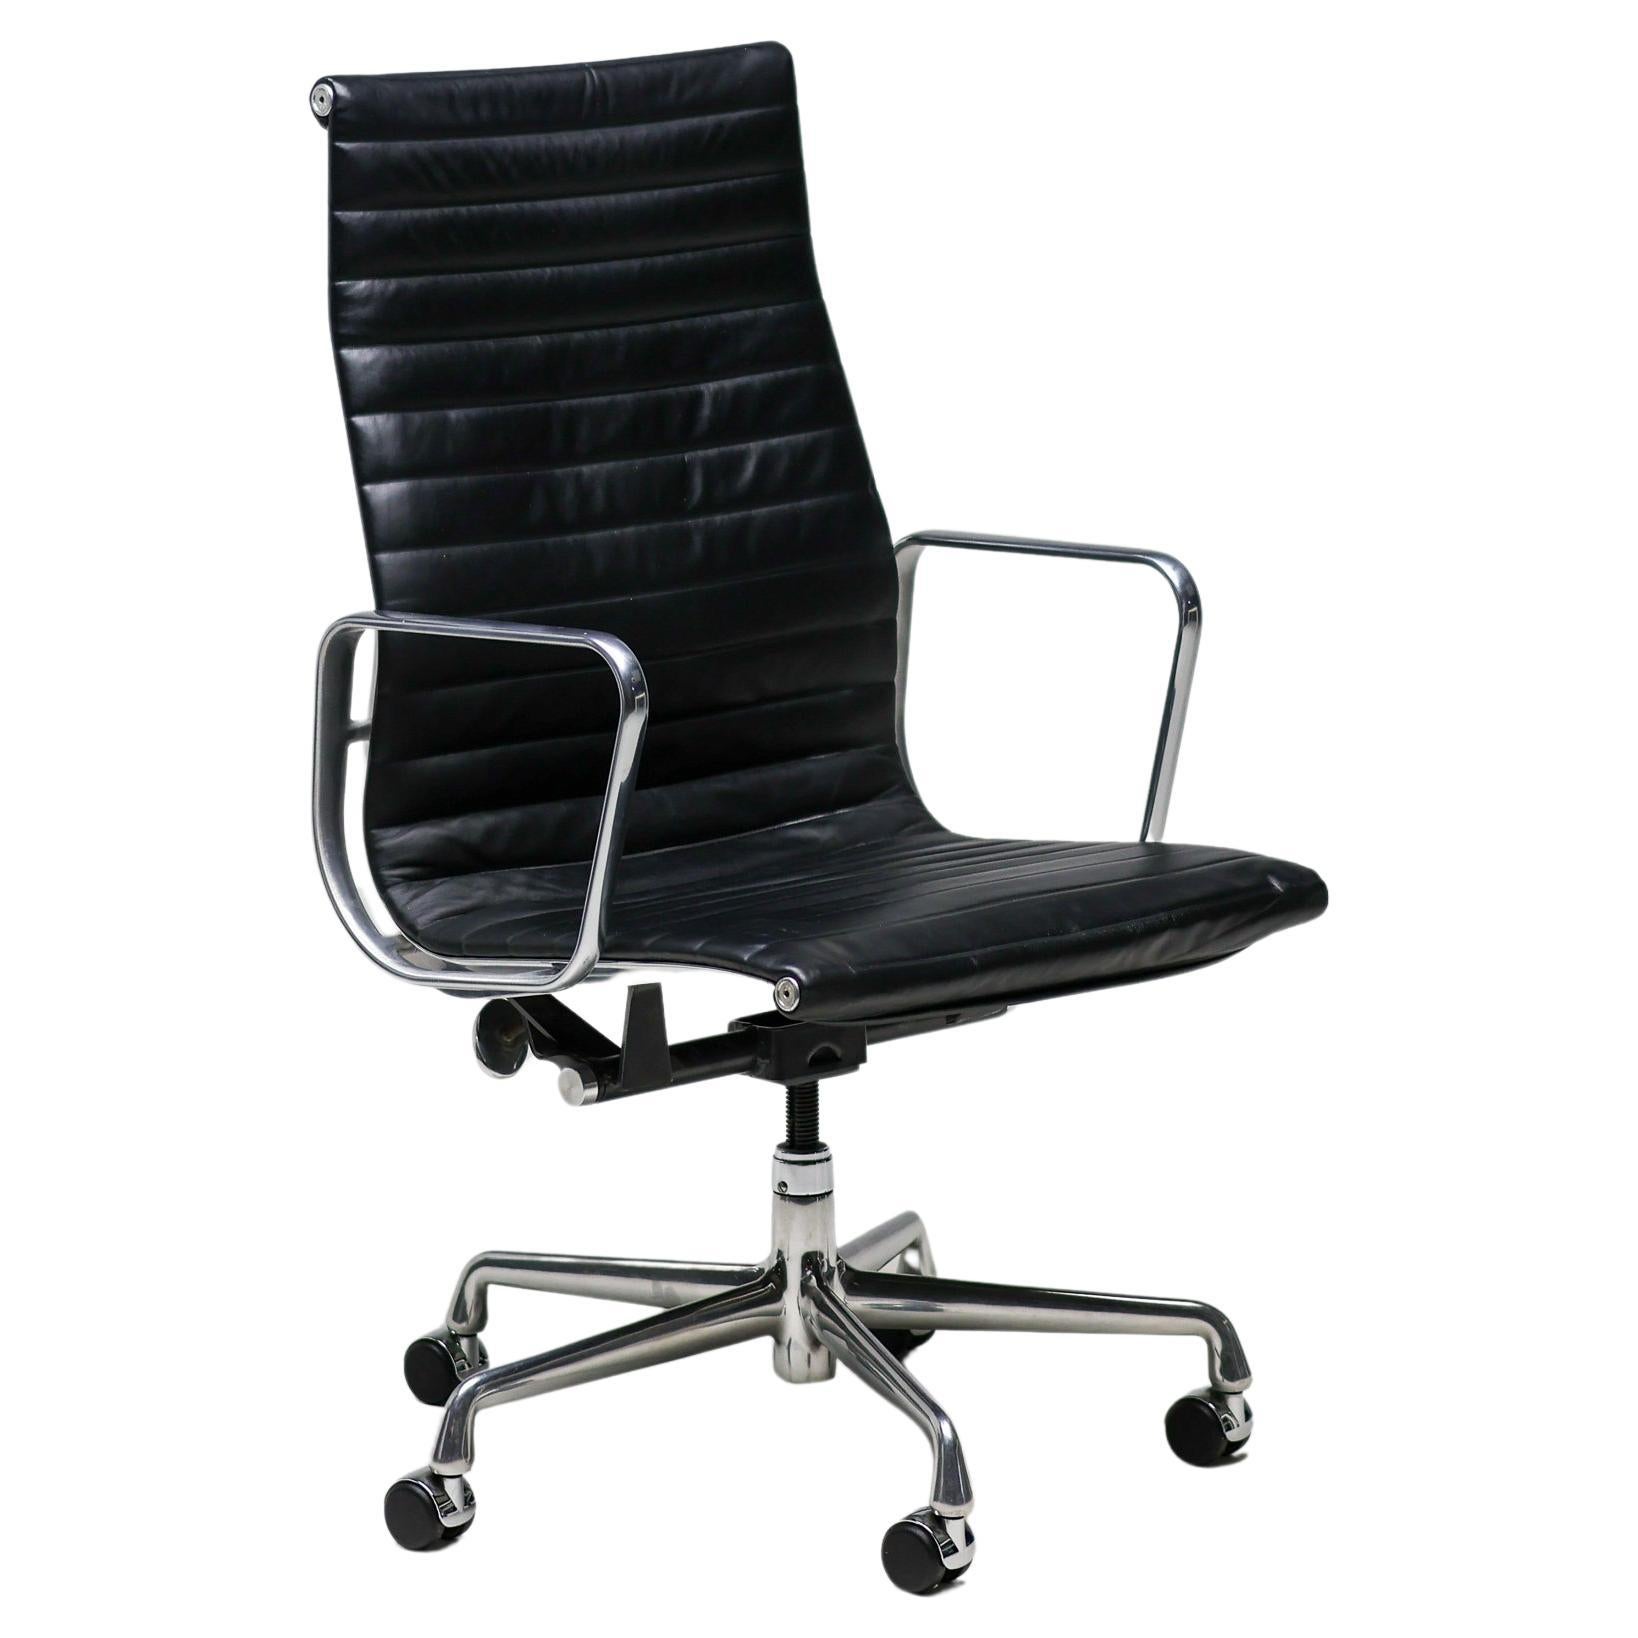 Charles & Ray Eames EA119 Black Leather Executive Desk Chair by Herman Miller